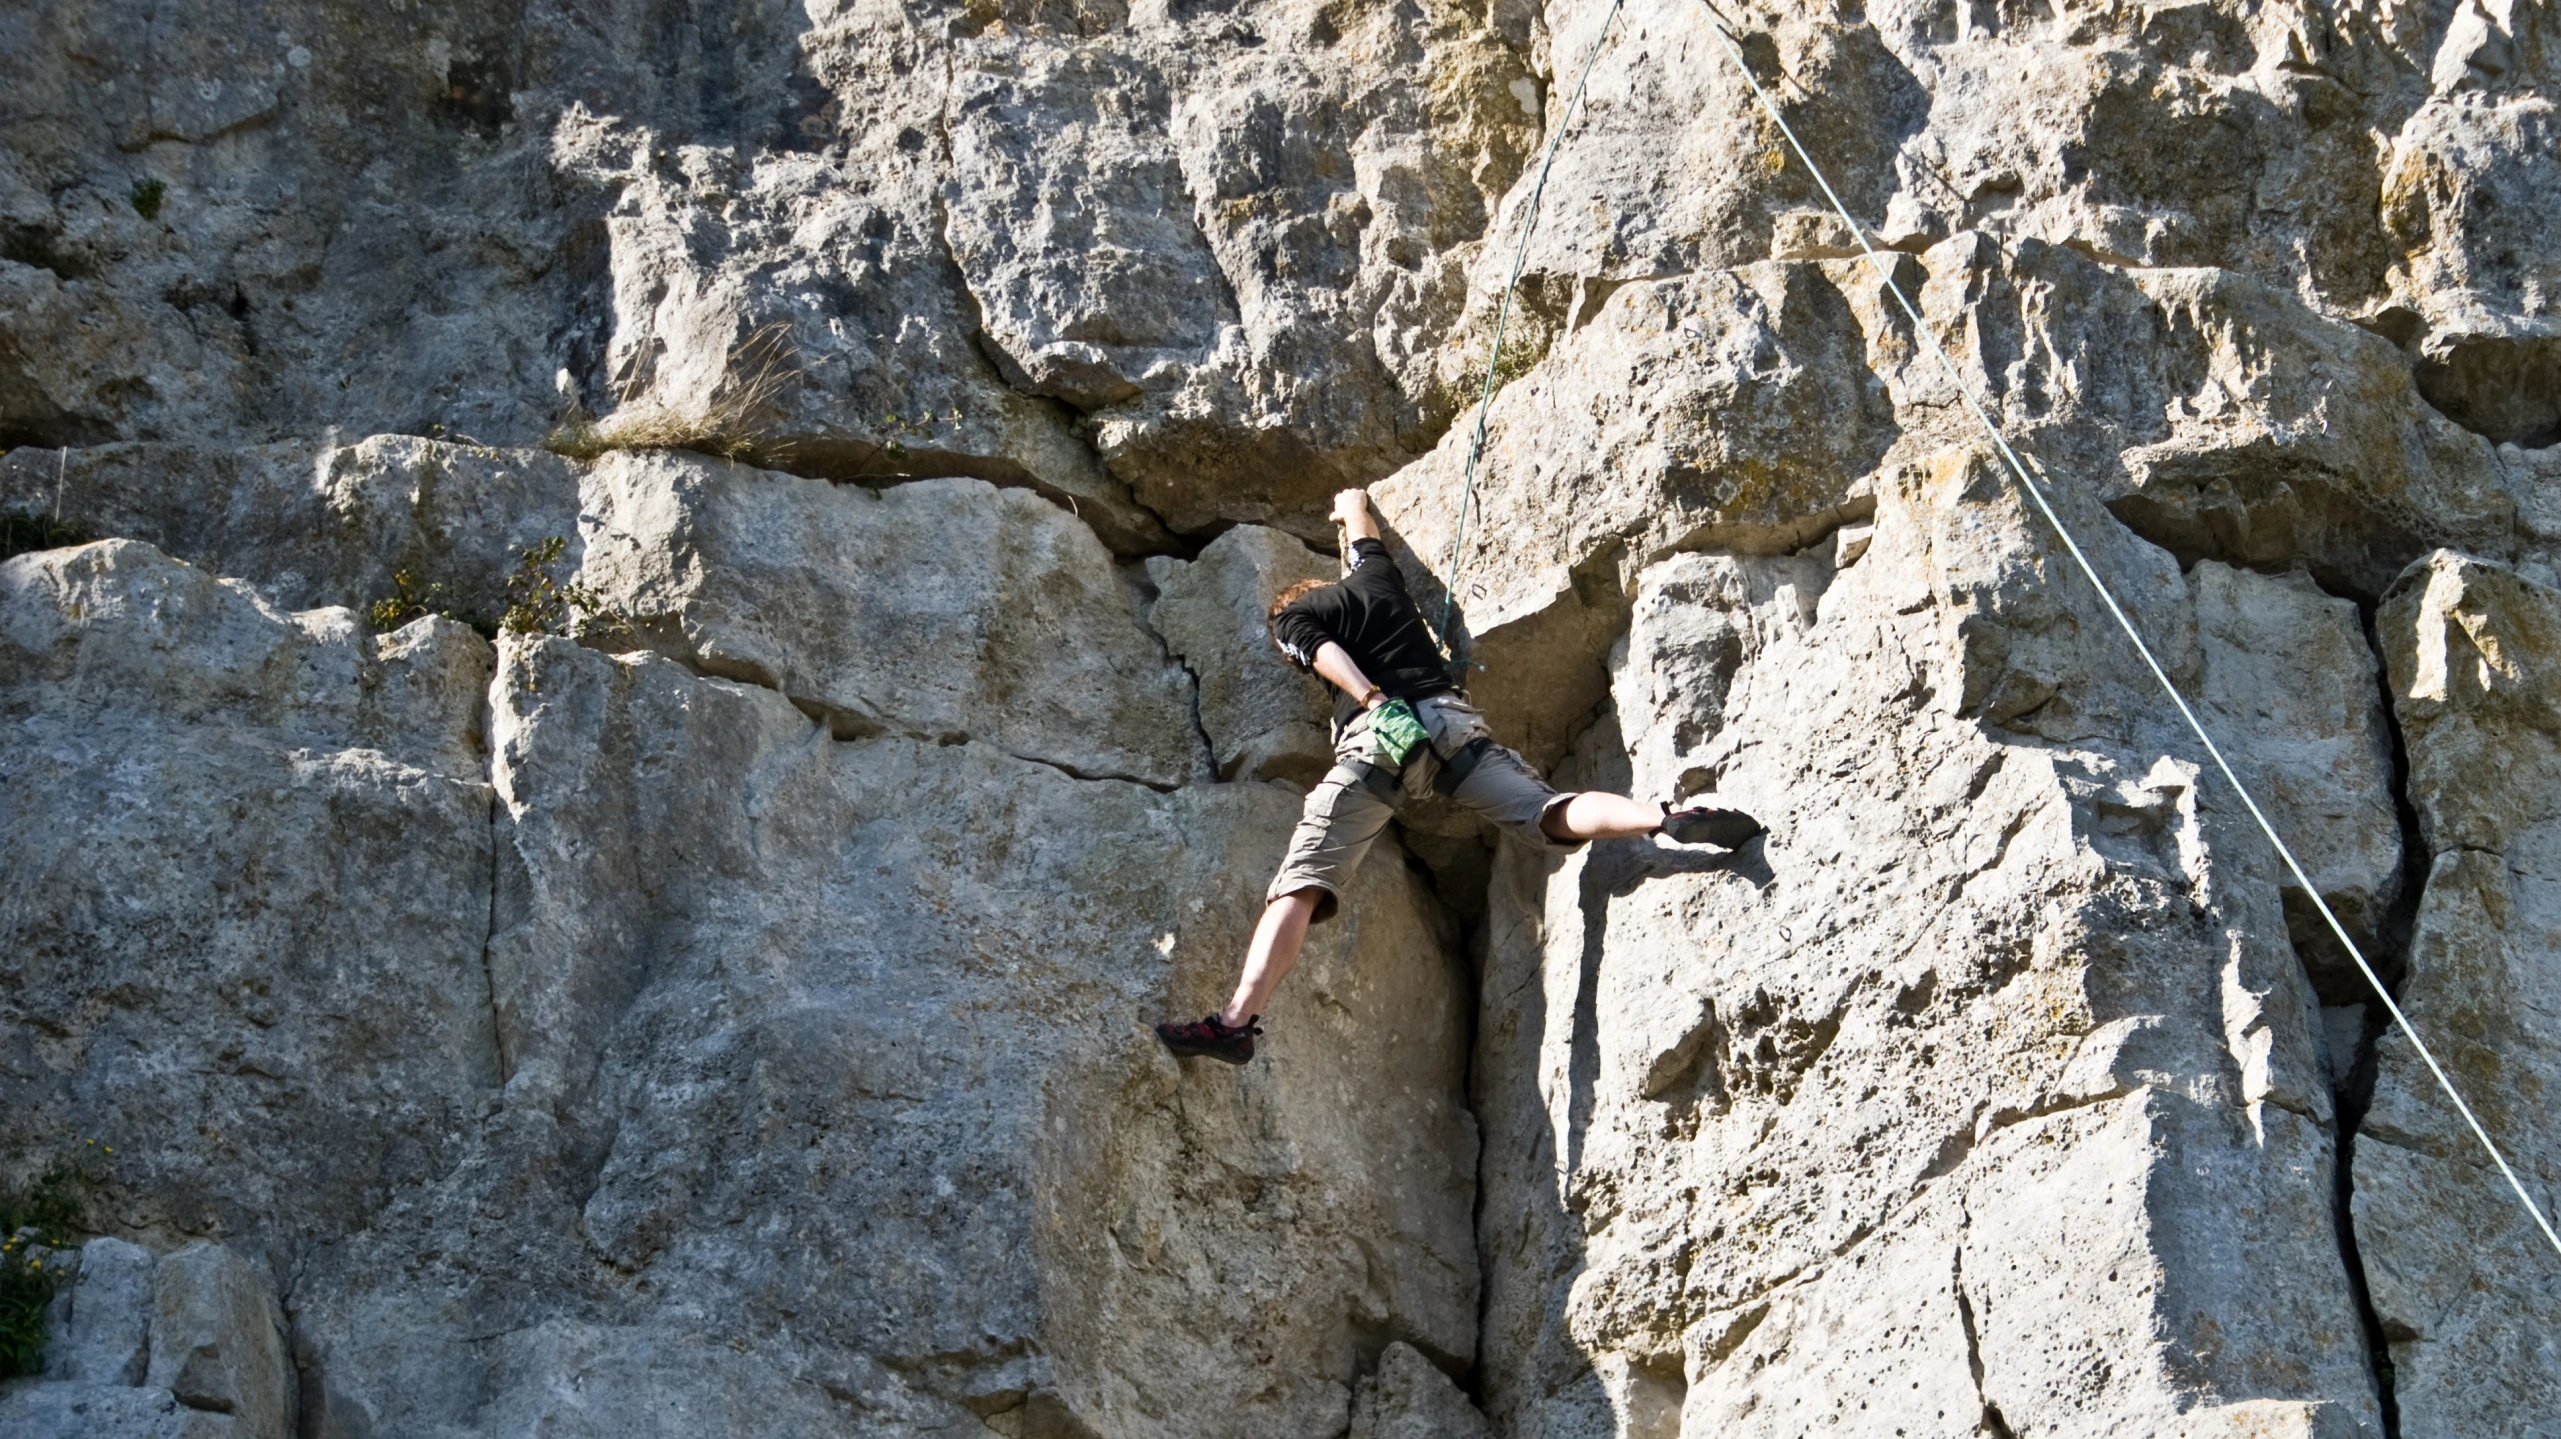 person with climbing gear on climbing up a steep rock face